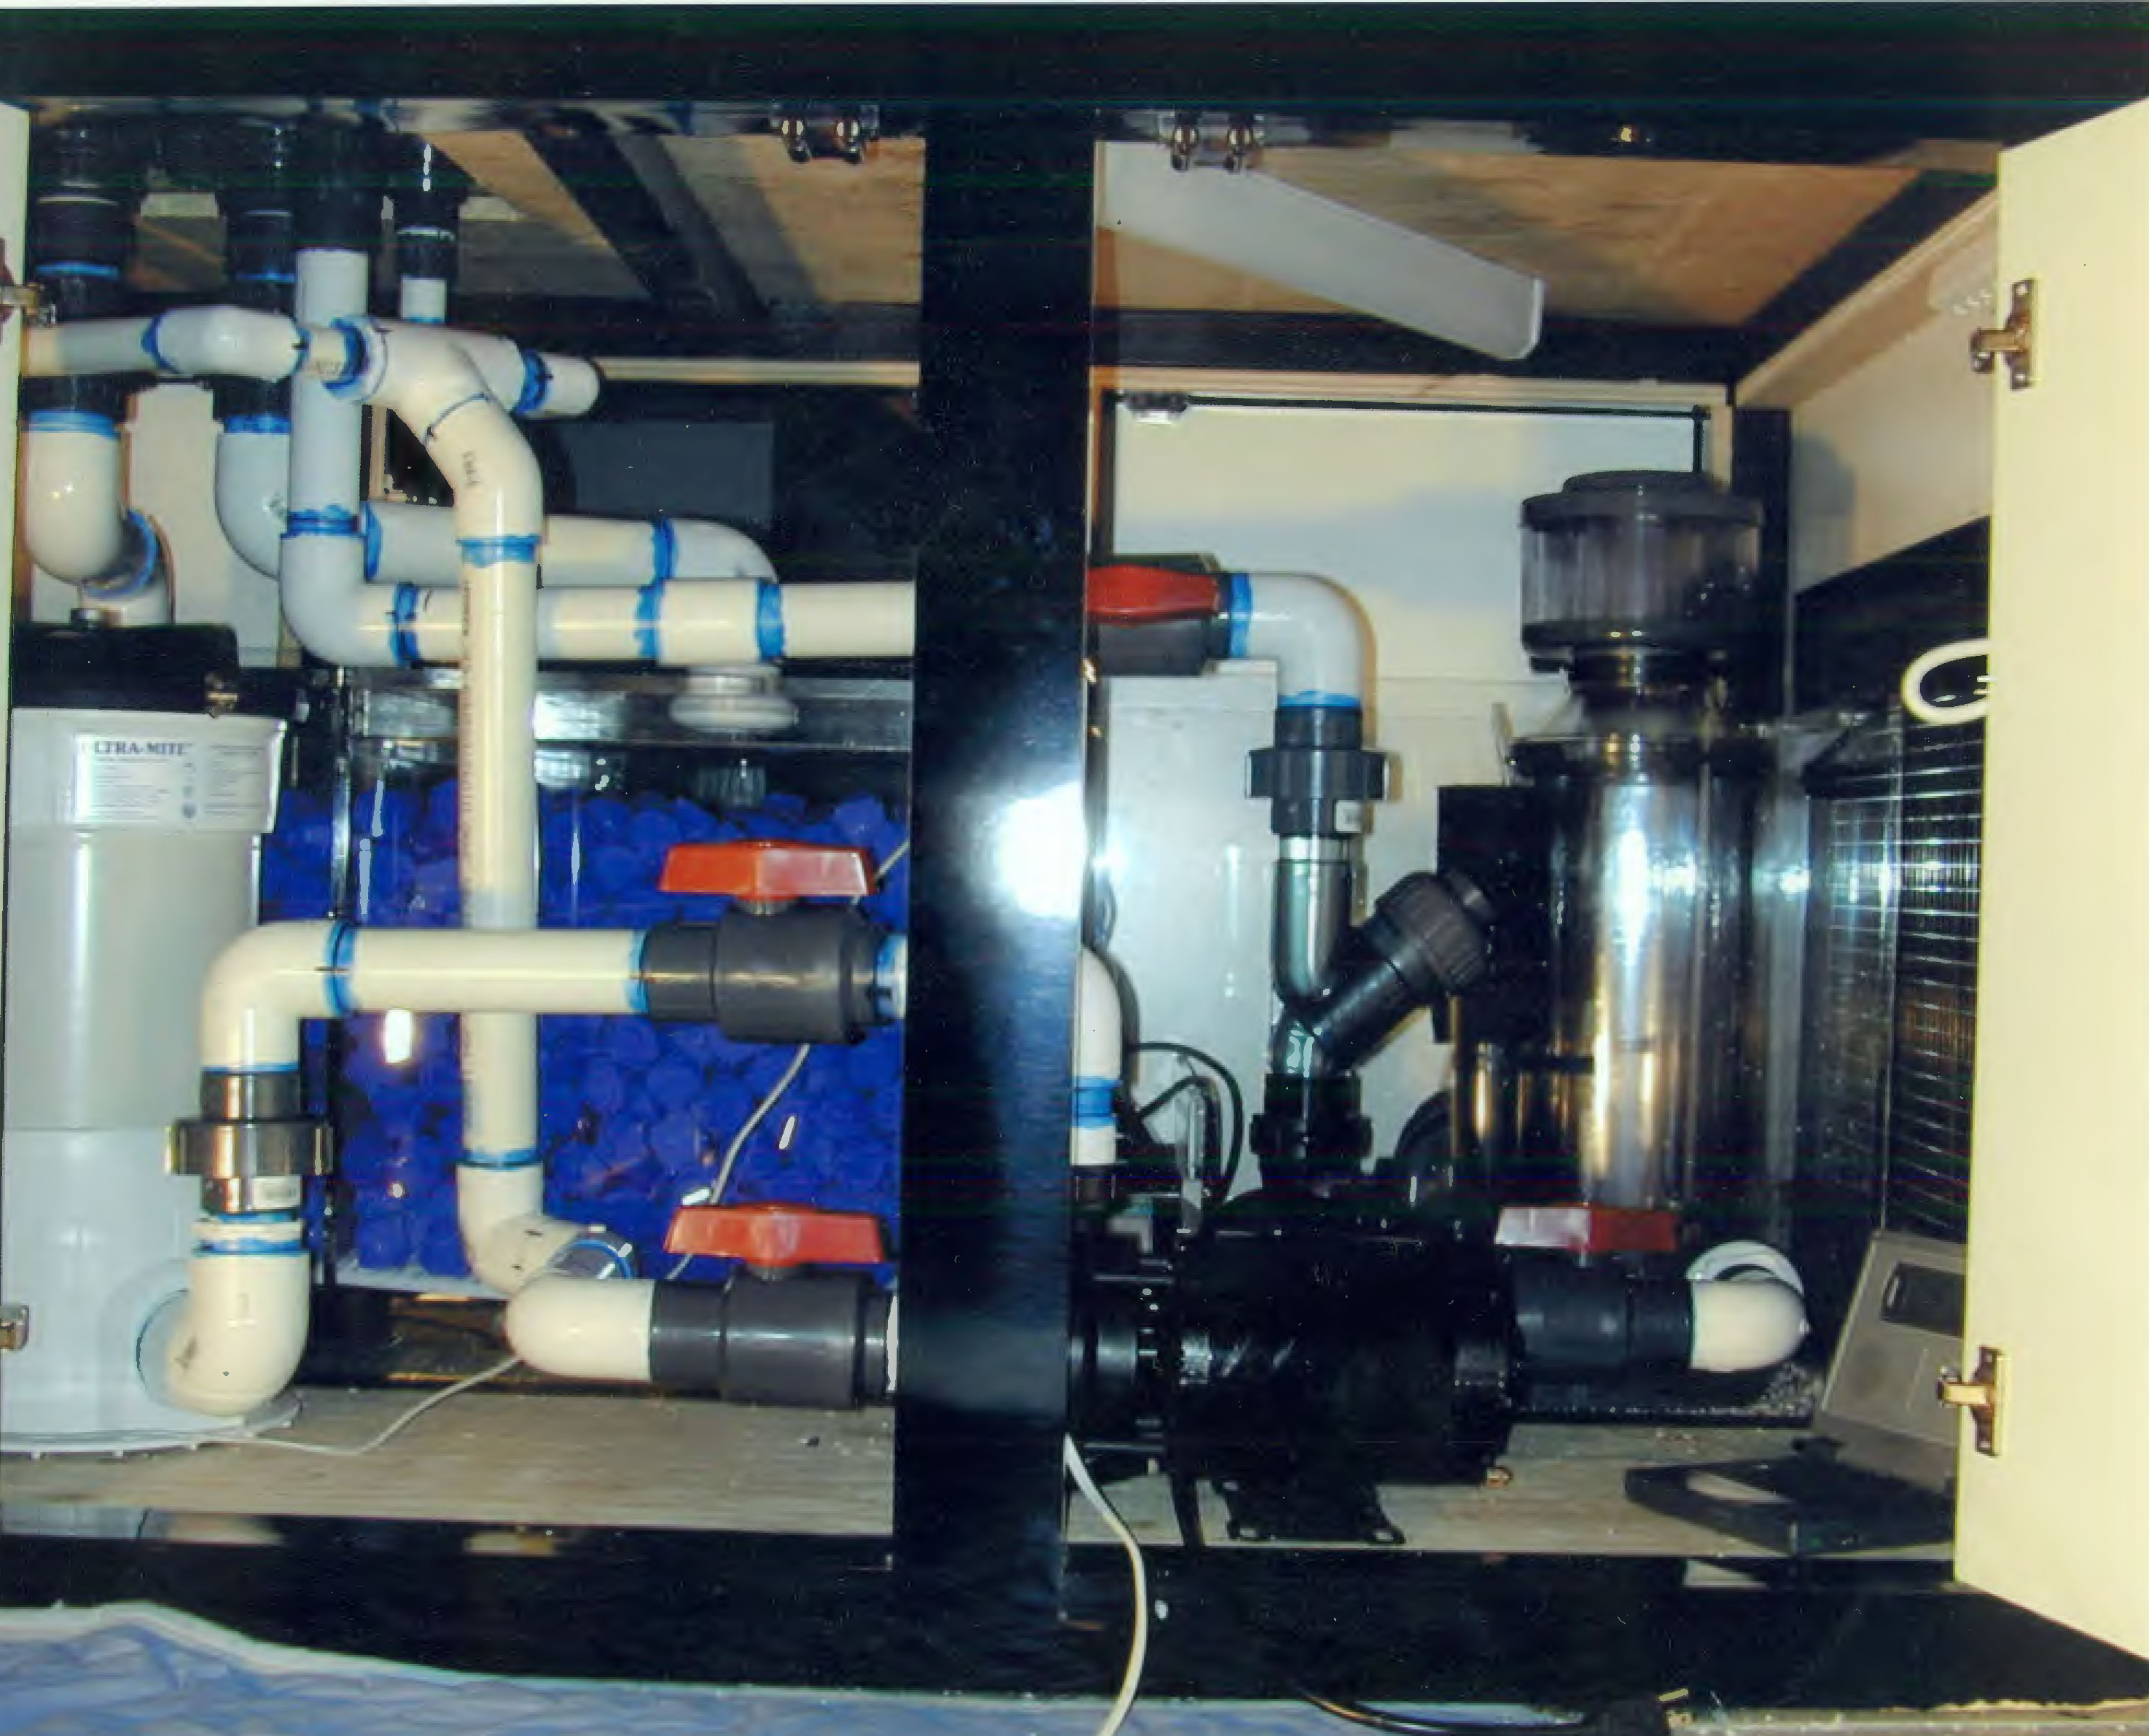 Plastic Pipelines Inside a Cabinet